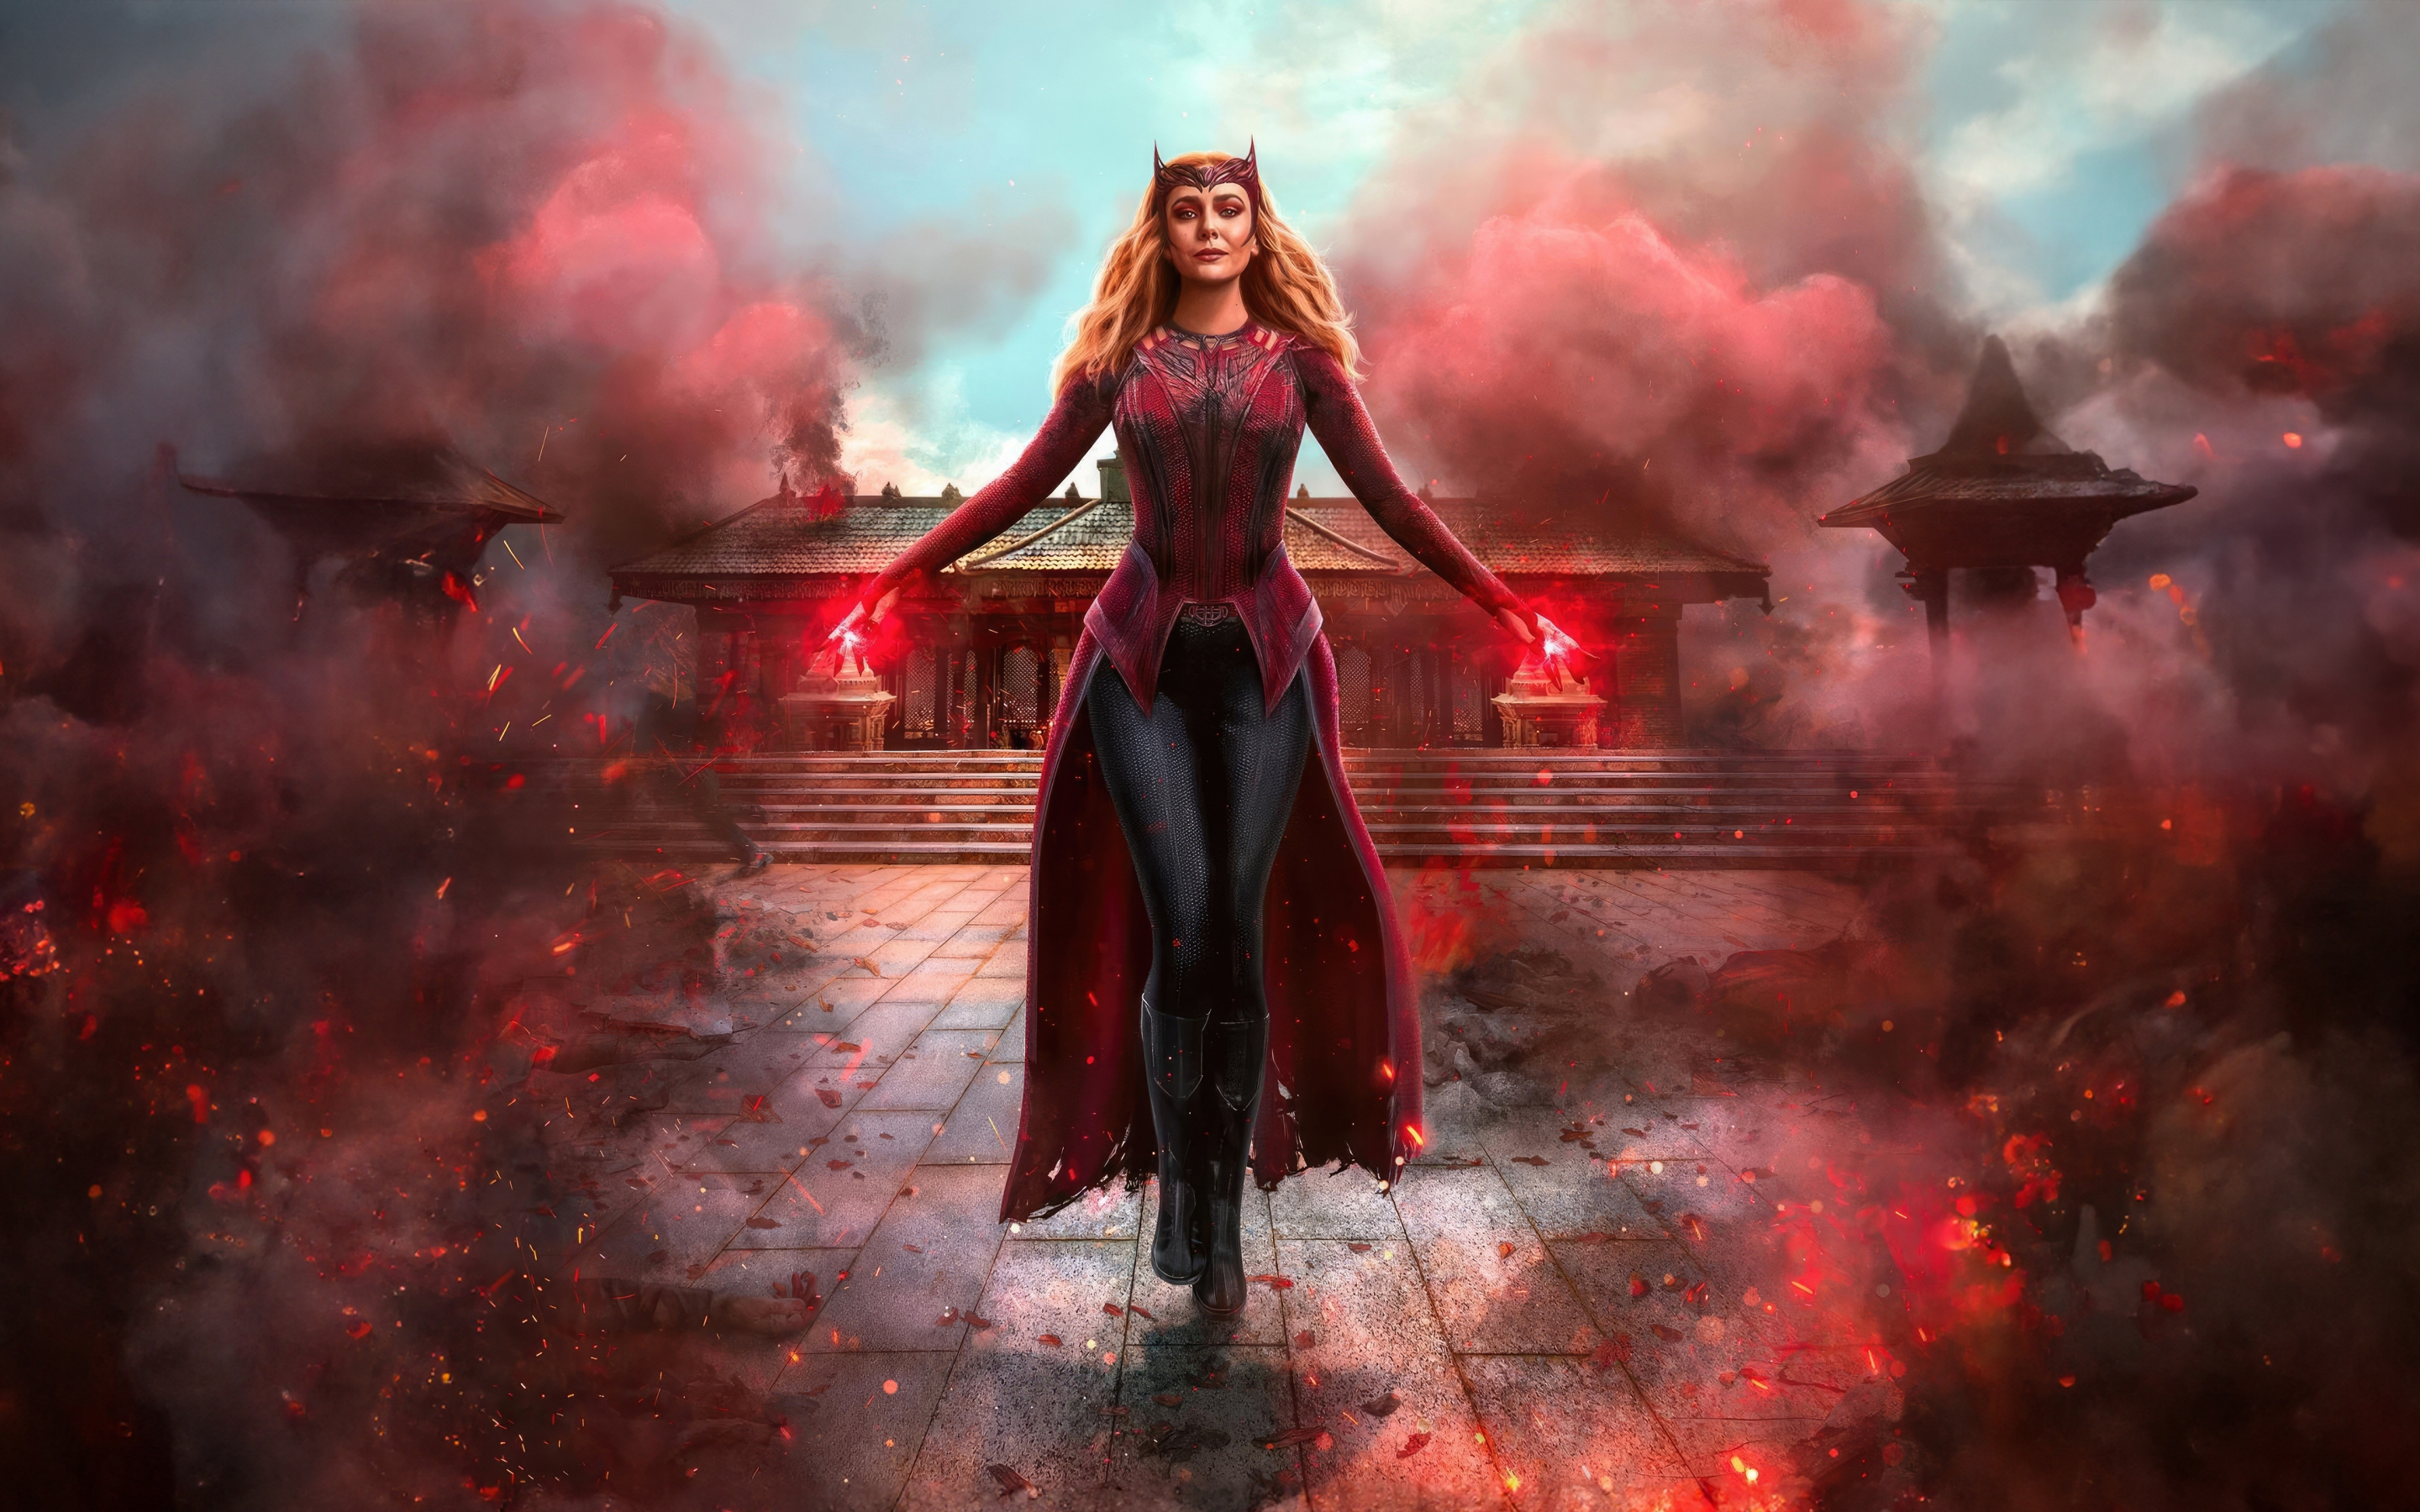 Chaos wizard, scarlet witch, movie, 2880x1800 wallpaper